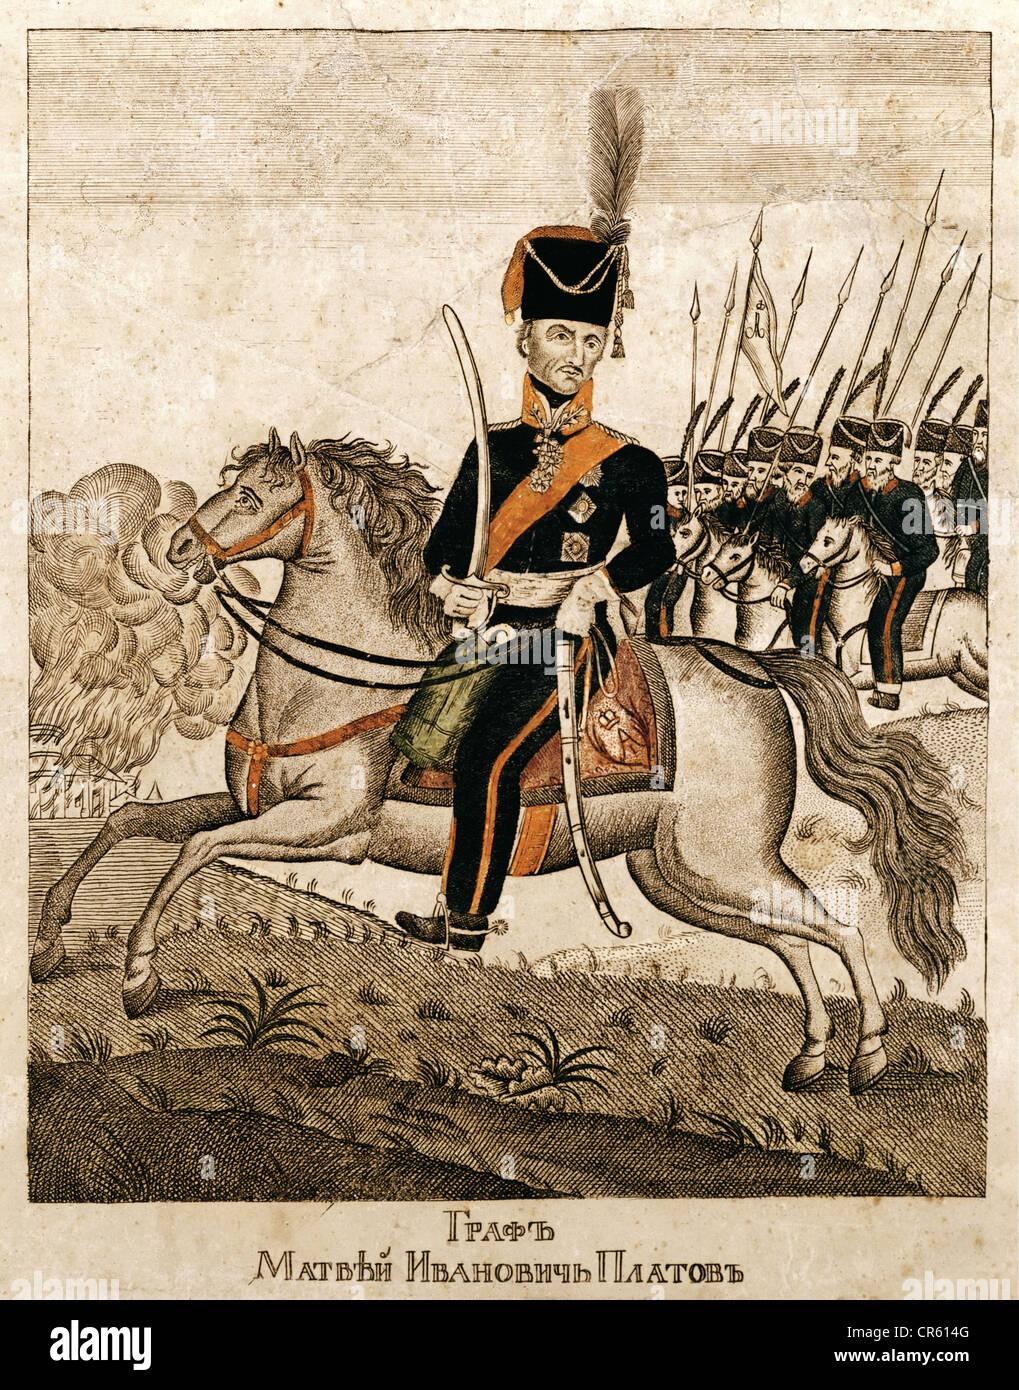 Platov, Matvei Ivanovich, 17.8.1751 - 15.1.1818, Russian general, equestrian half length, lithograph, mid 19th century, State Historical Museum, Moscow, , Stock Photo